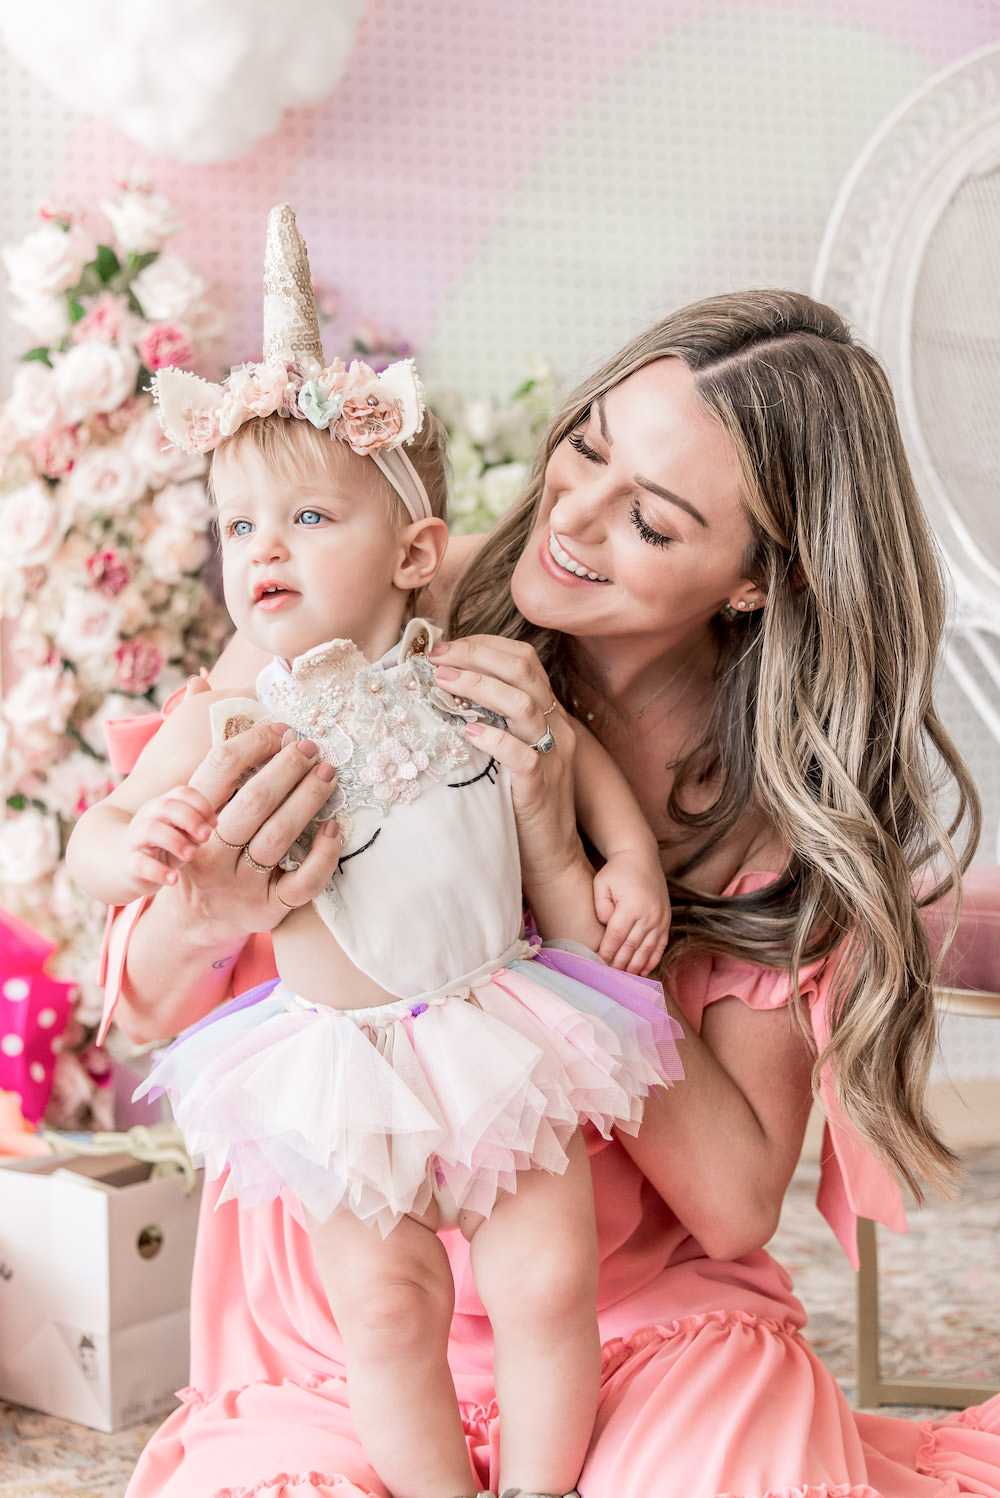 Dash of Darling | Luna's Rainbows and Unicorns First Birthday Party